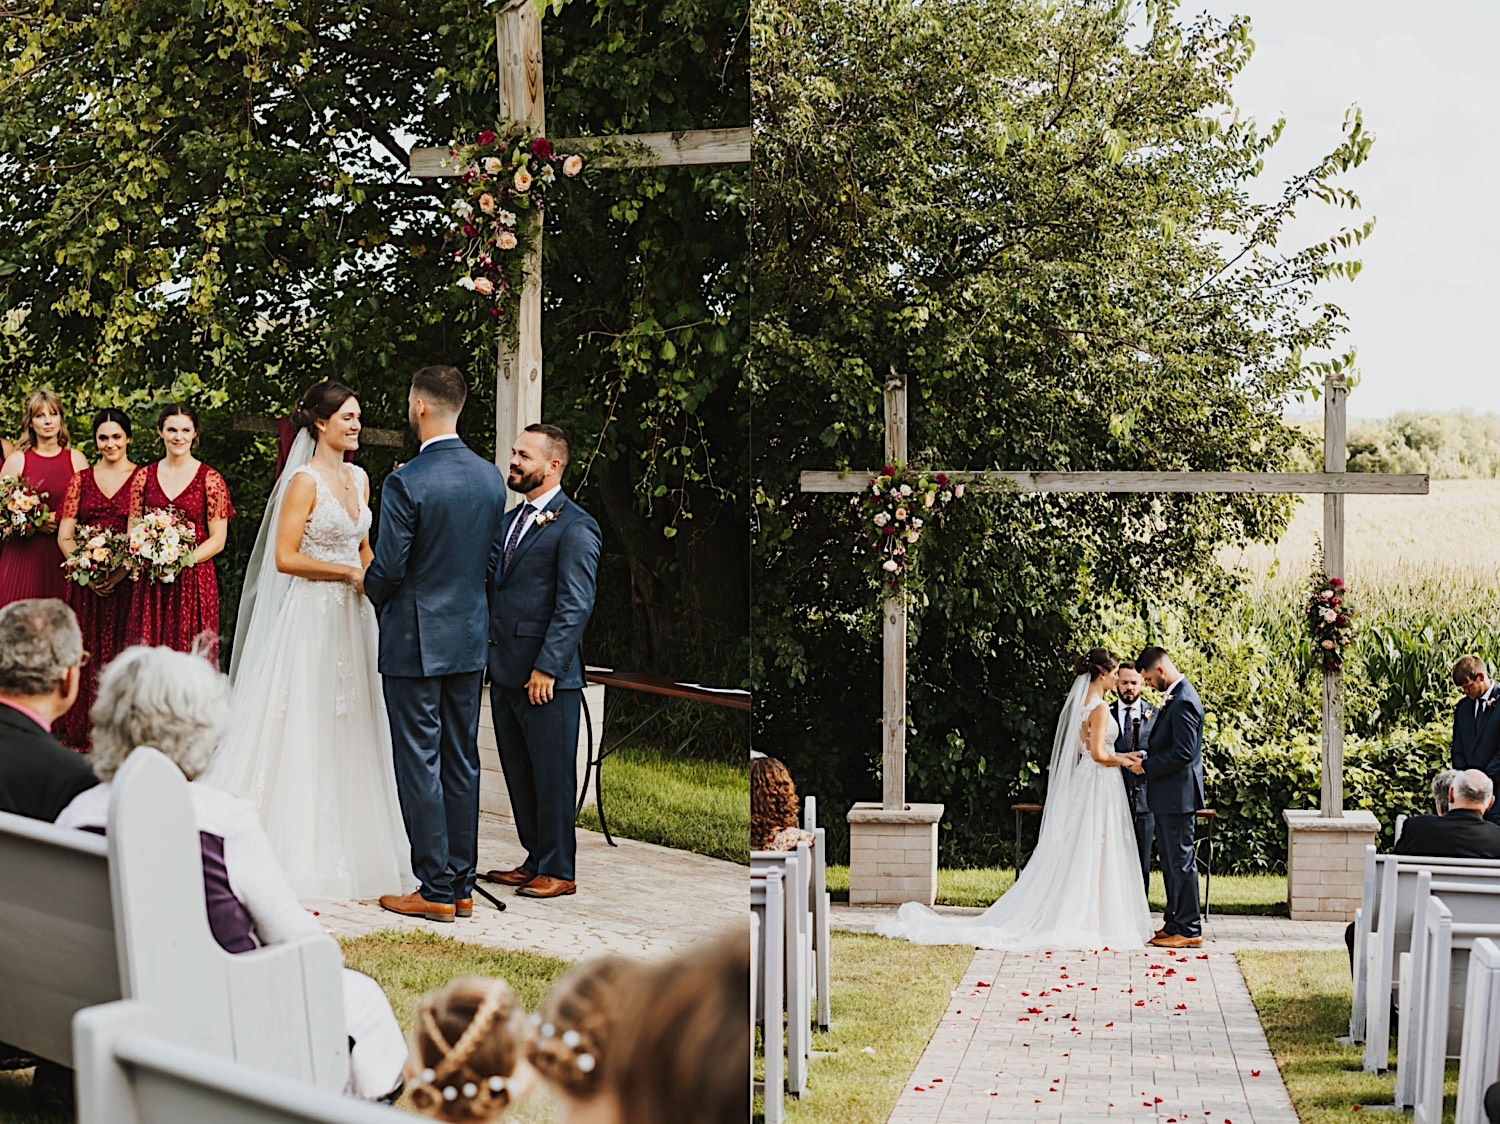 2 photos side by side of a bride and groom standing next to one another during their outdoor wedding ceremony